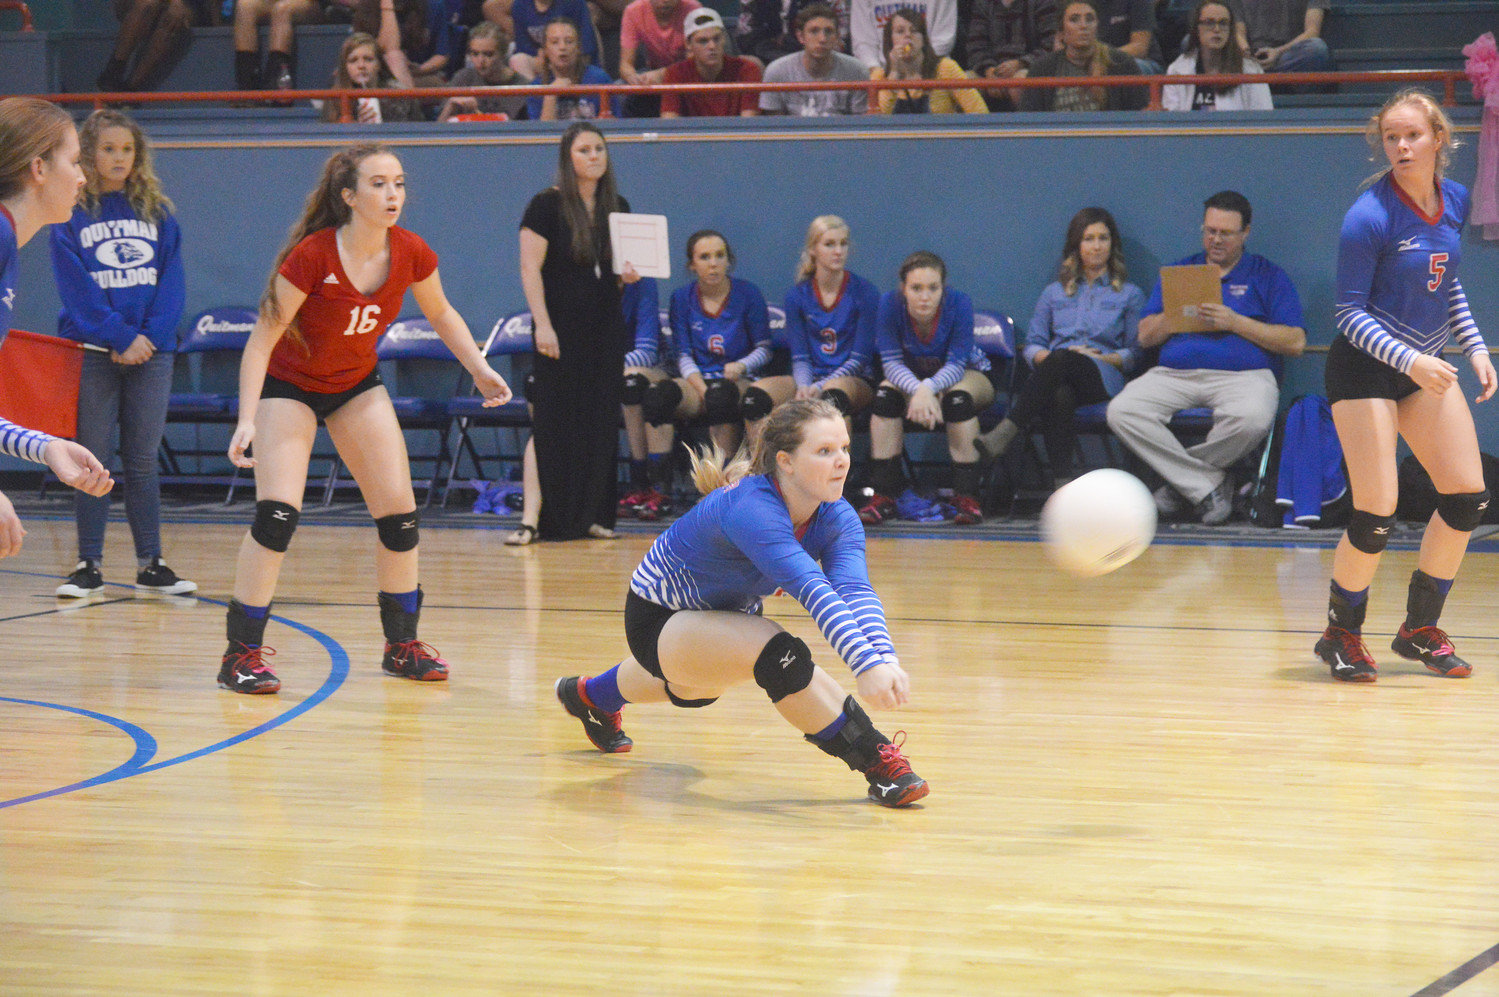 Lady Bulldog Abby Dobbs digs deep on a serve from Mineola in Quitman’s district over Mineola. The Lady Bulldogs begin the state playoffs next week.  (Monitor photo by Larry Tucker)